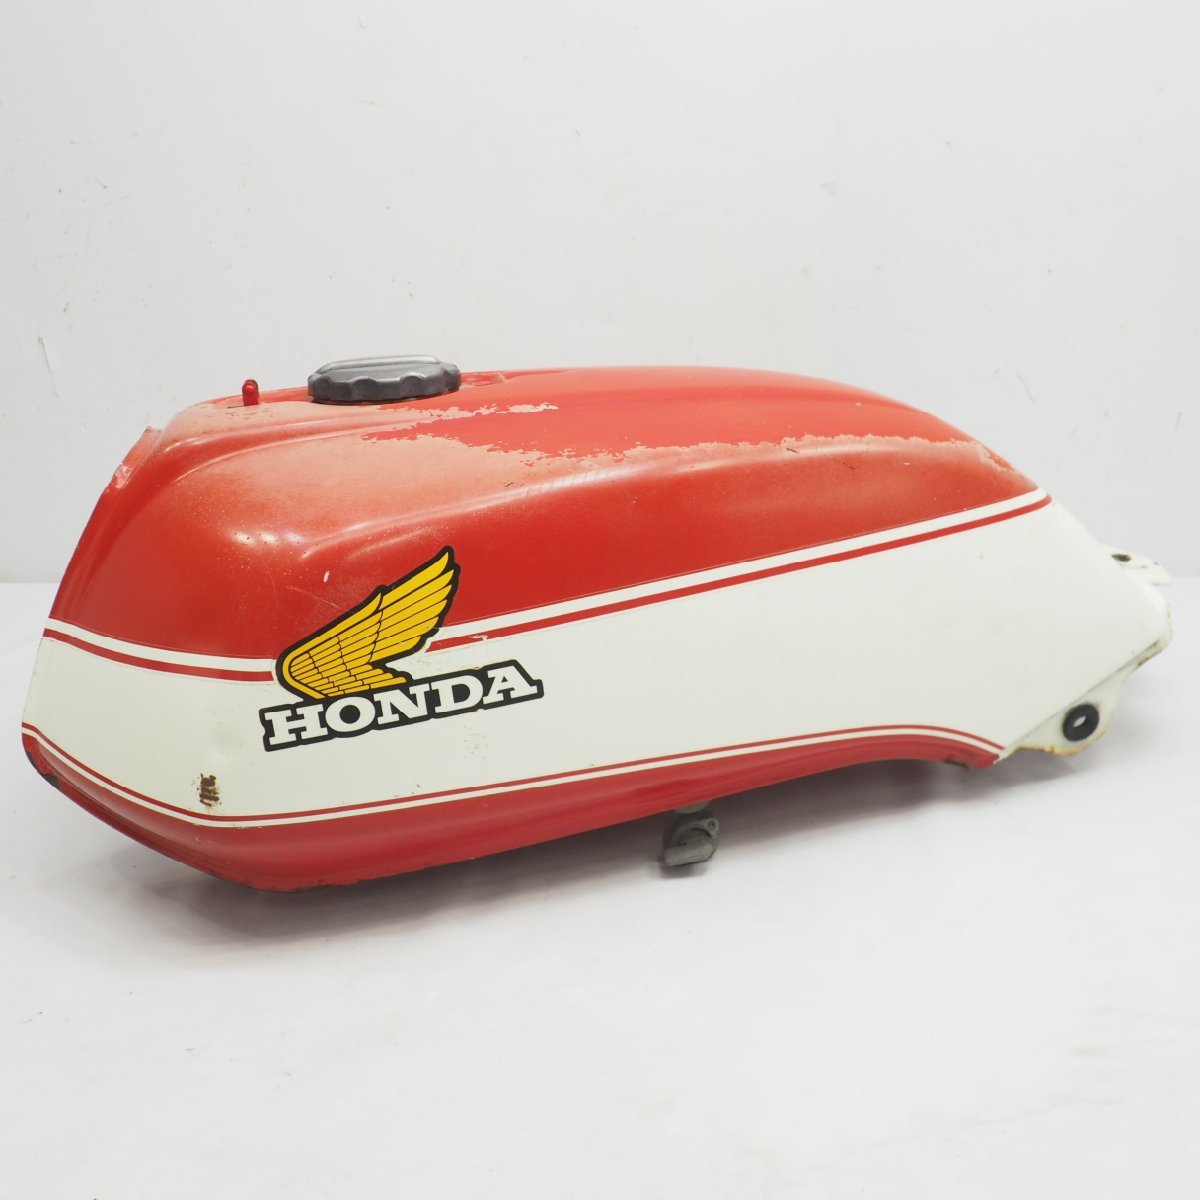  at that time!CB750F Bol D'Or gasoline tank RC04 Bol D'Or 2 CB900F FB CB1100F FA FZ FC fuel tank fuel tank 